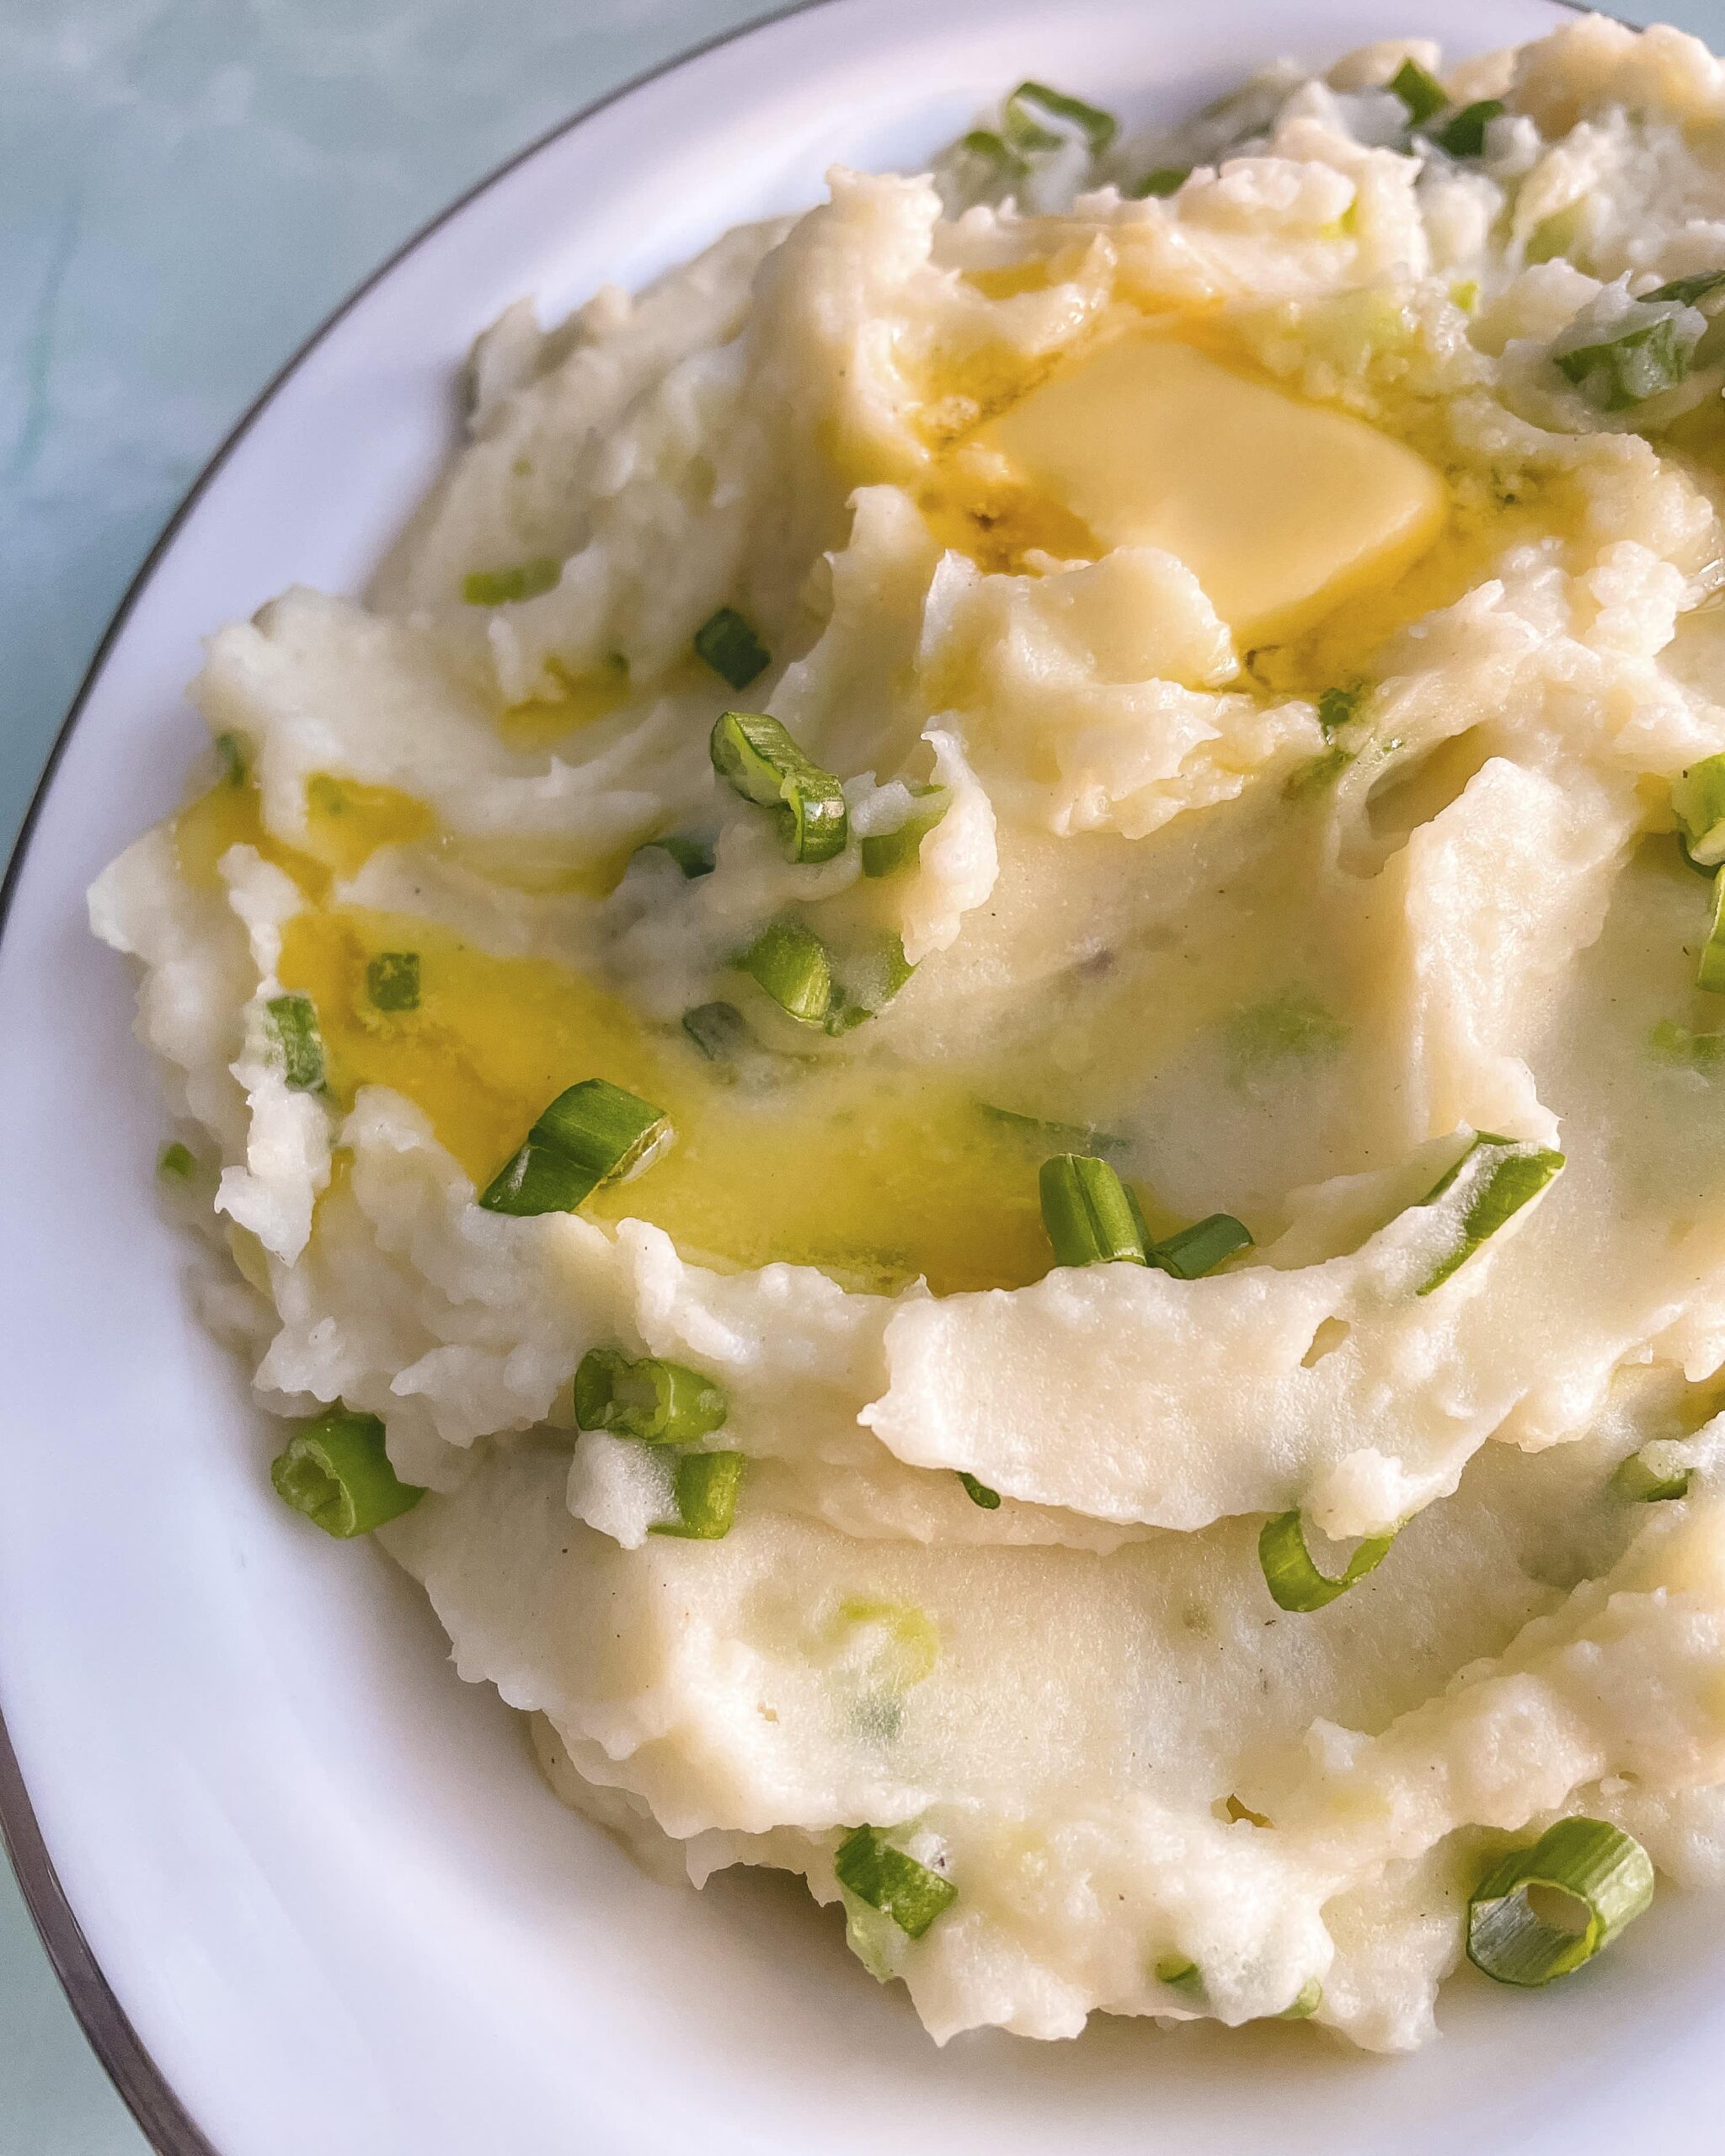  Get your cheese fix with this unique twist on a classic comfort food.